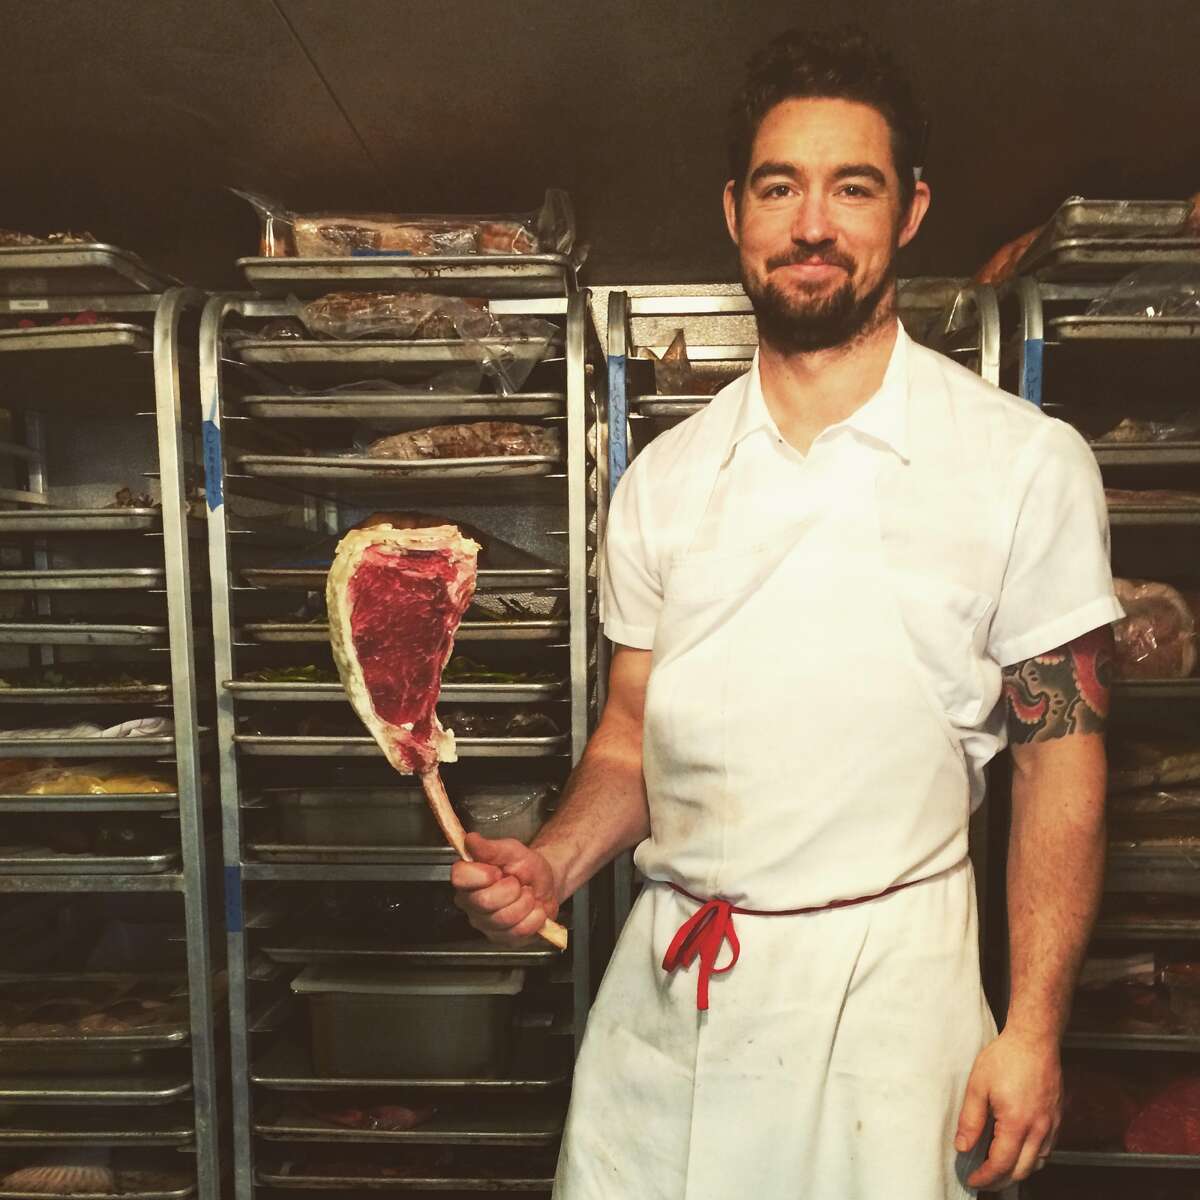 Thistle Meats' new owner Travis Day. Photo via Thistle Meats